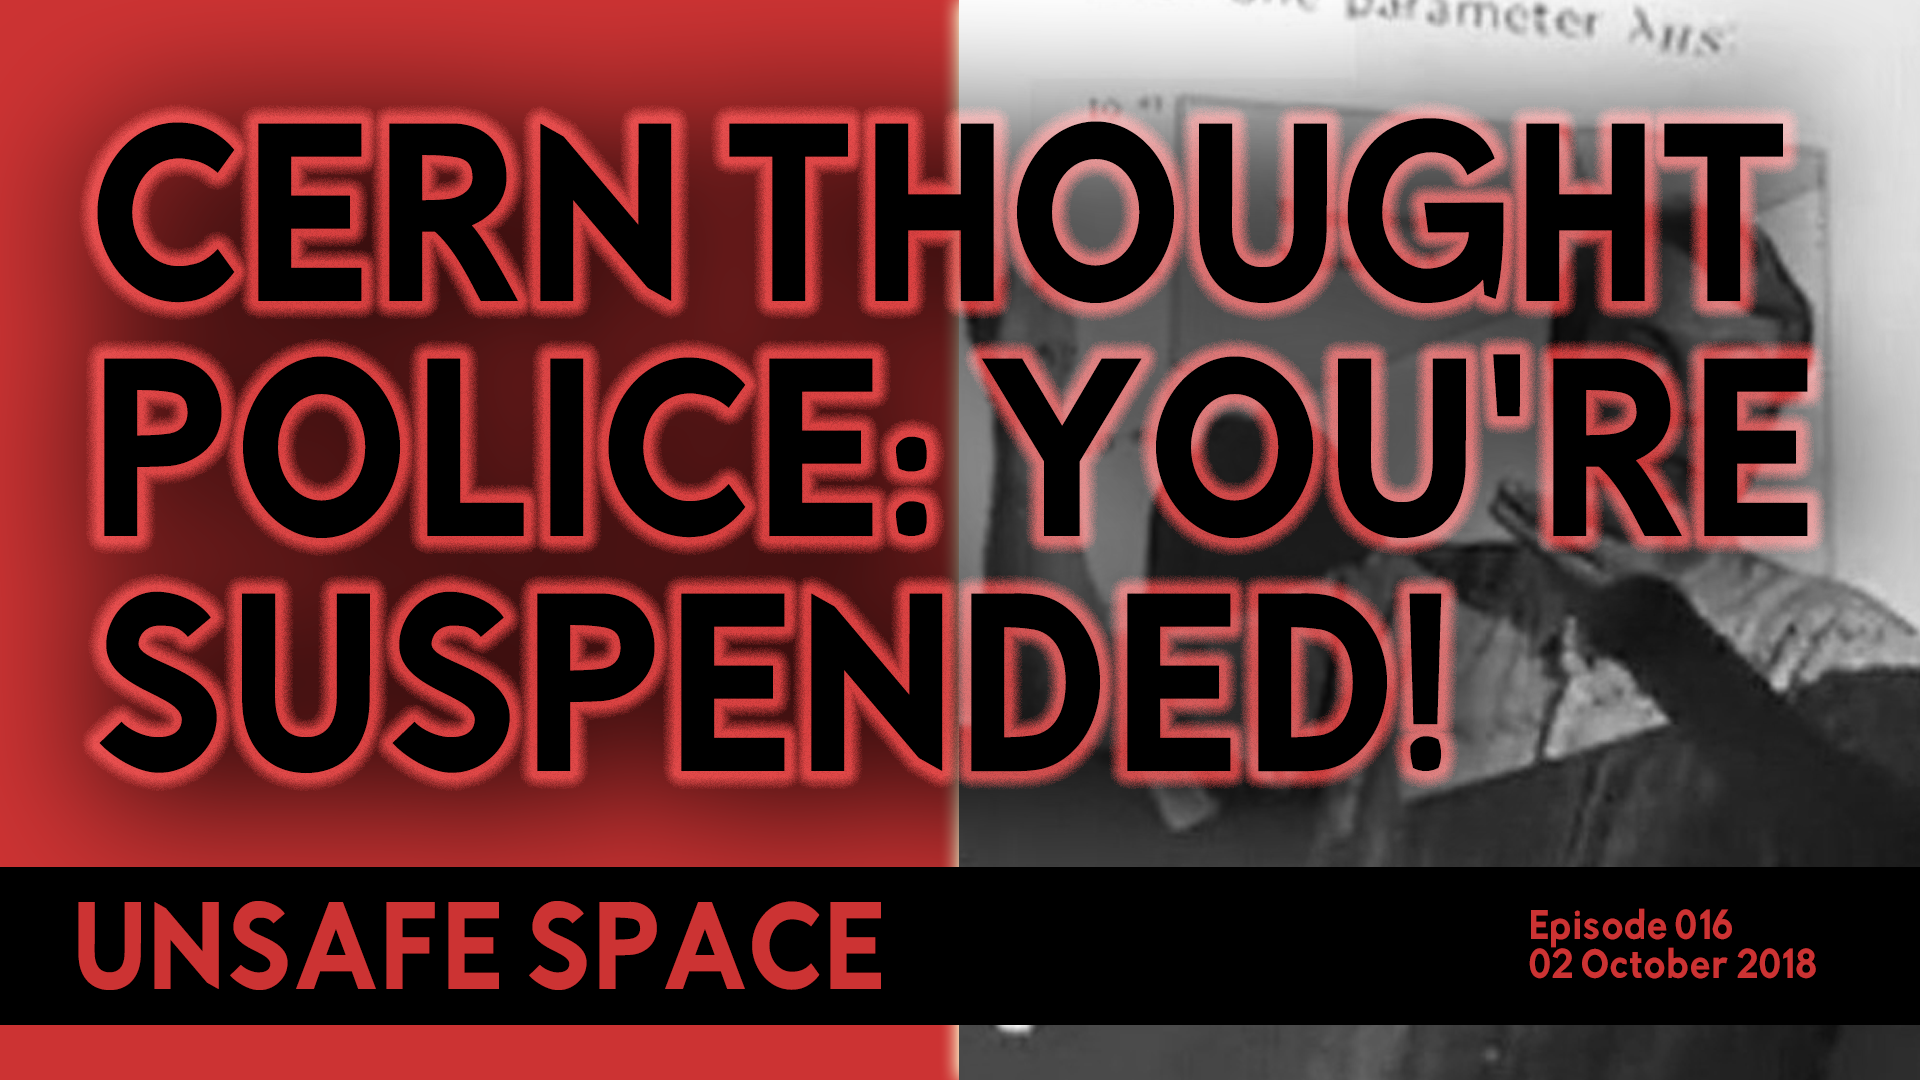 [Episode 016] CERN Thought Police: You’re Suspended!